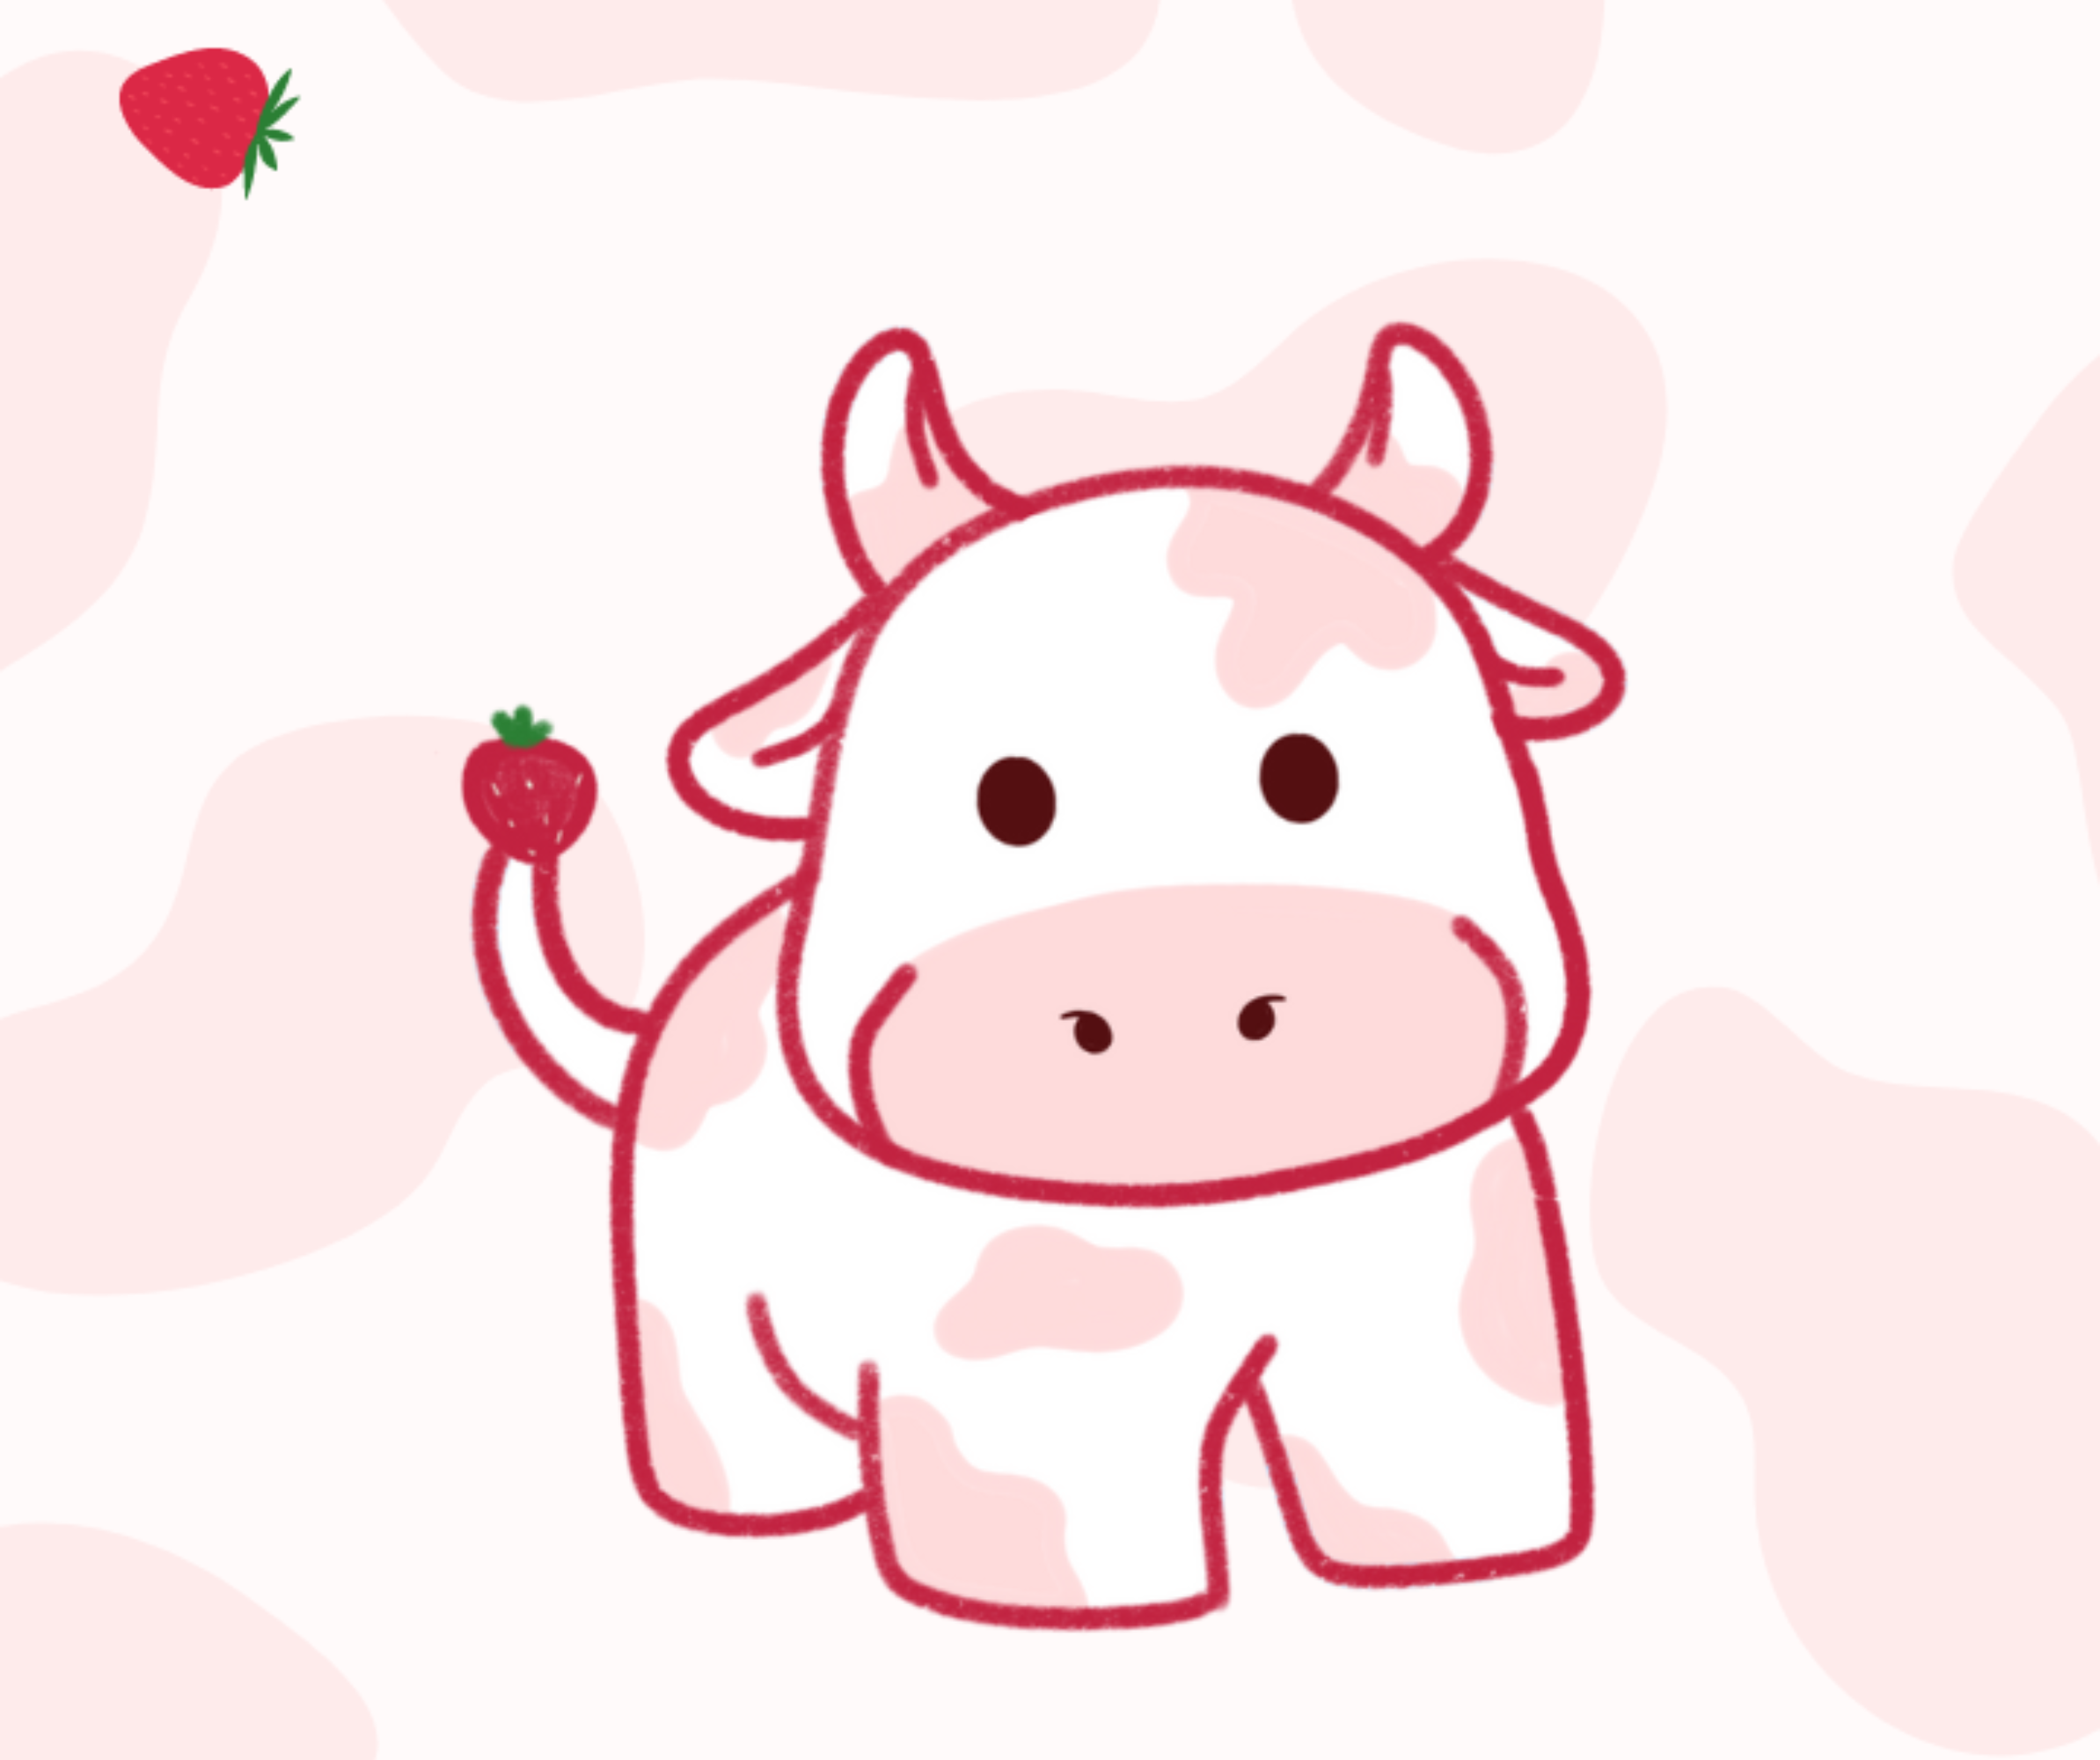 2763 Strawberry Cow Images Stock Photos  Vectors  Shutterstock